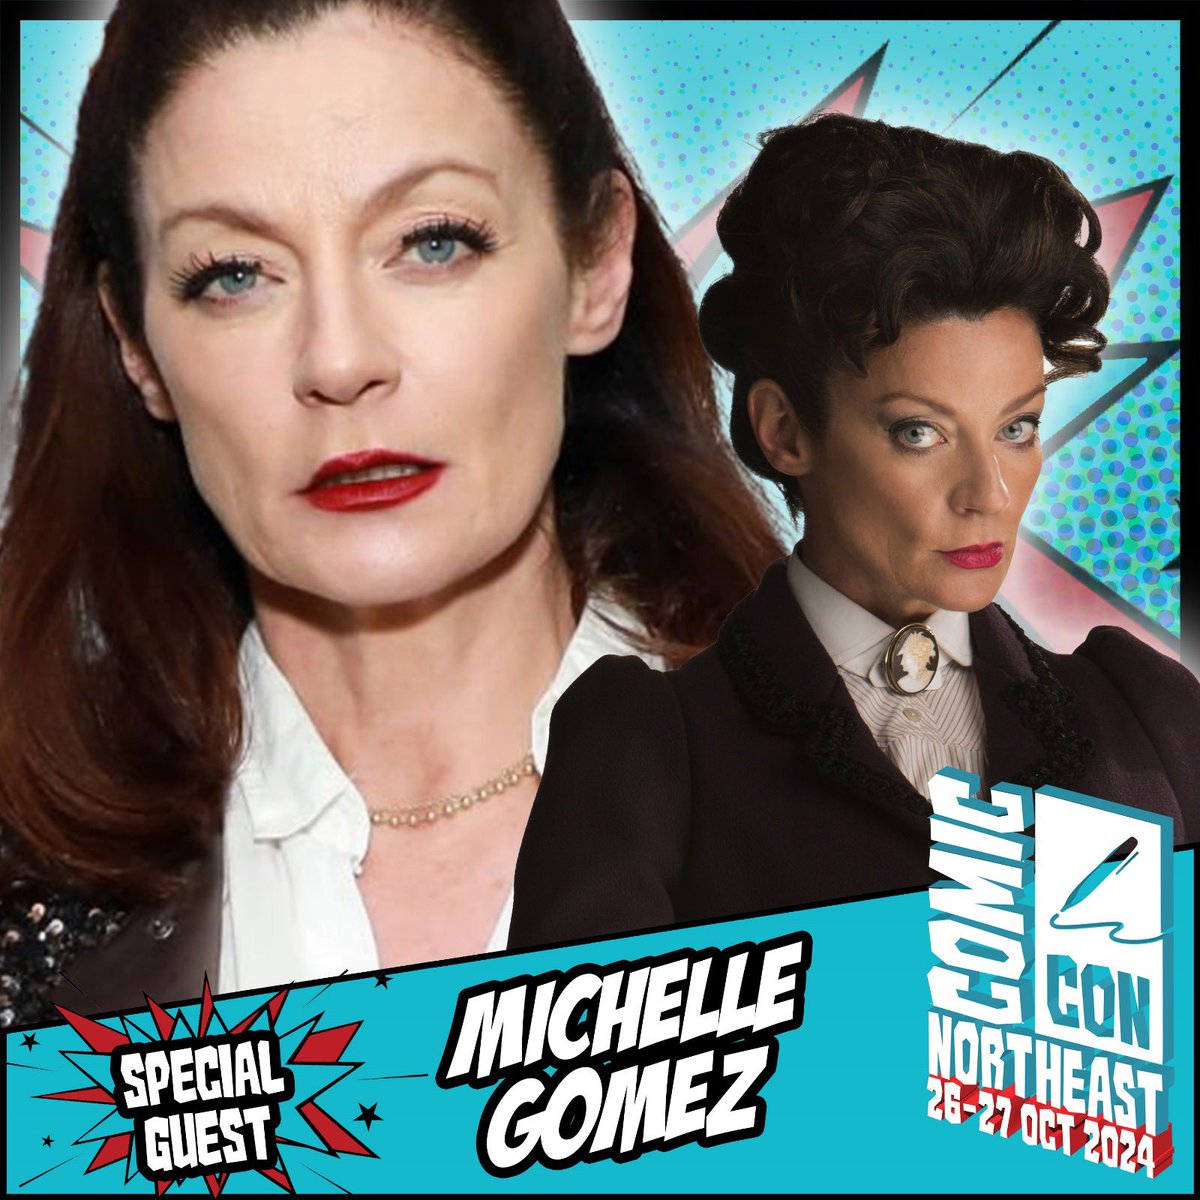 Comic Con North East welcomes Michelle Gomez, known for projects such as Doctor Who, Chilling Adventures of Sabrina, Bad Education, and many more. Appearing 26-27 October! Tickets: comicconventionnortheast.co.uk